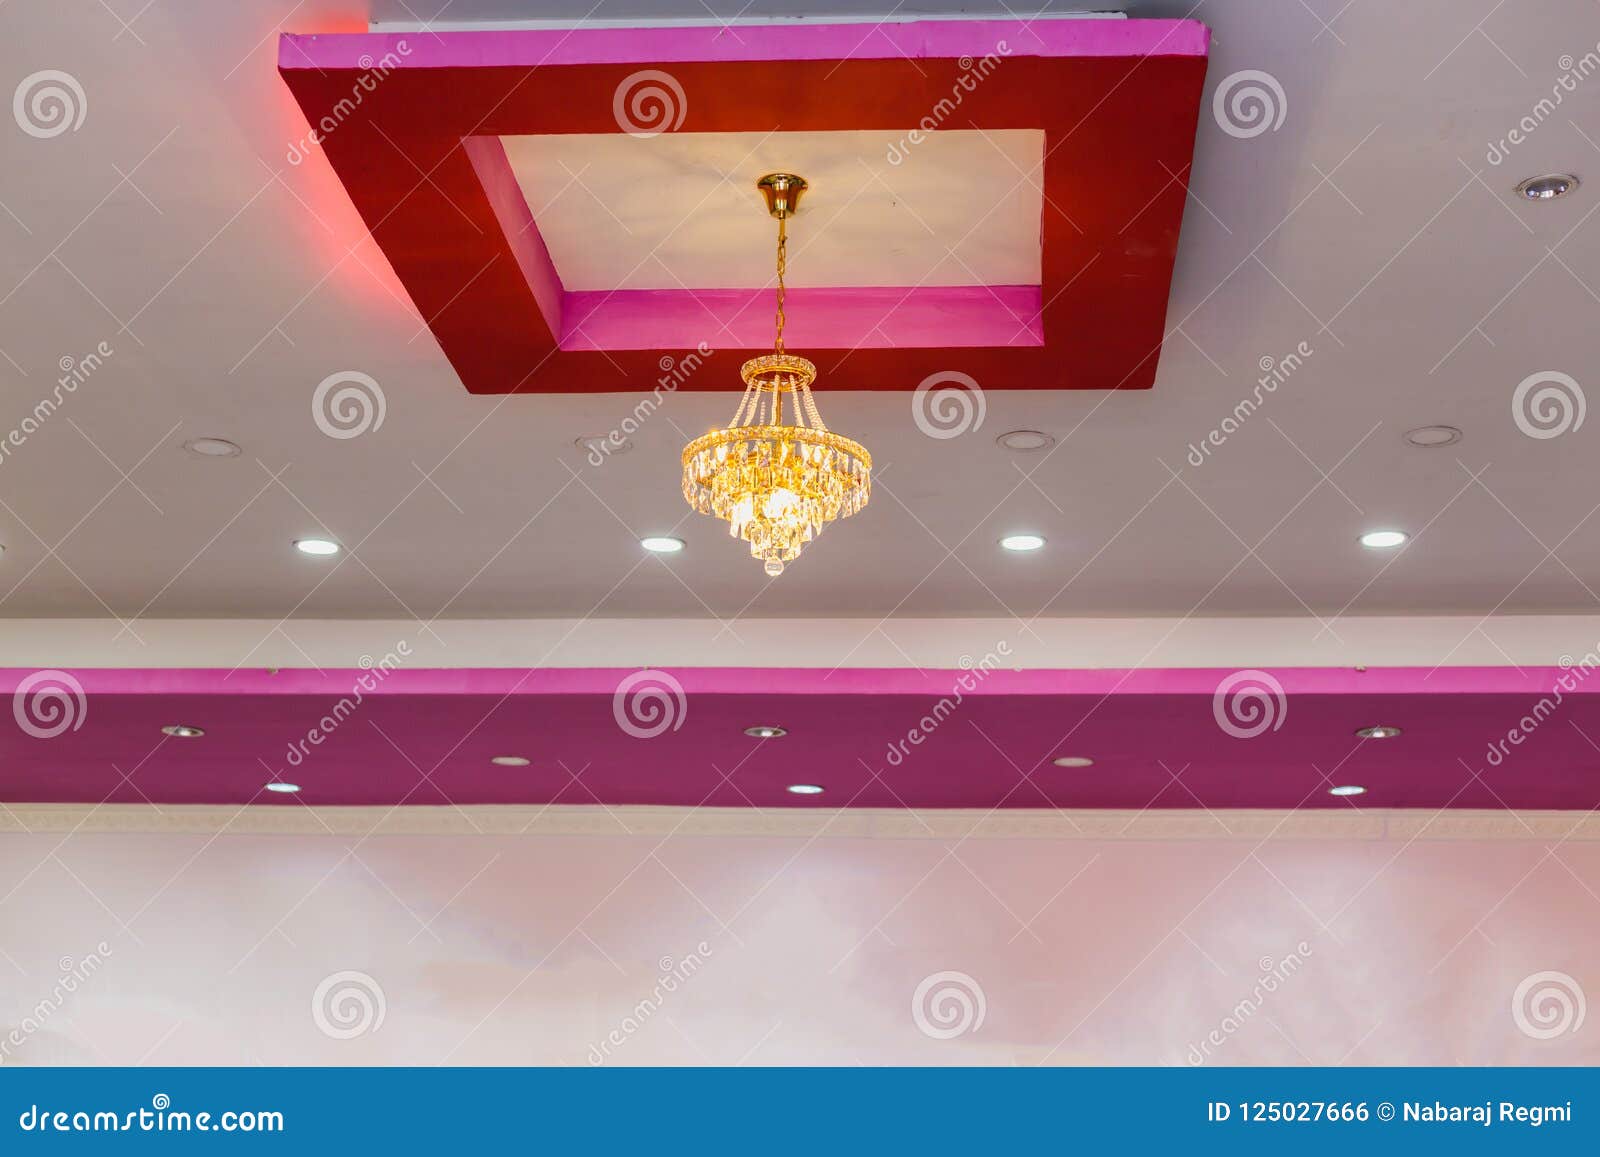 Morden Ceiling Design Ideas Ceiling Background And Texture